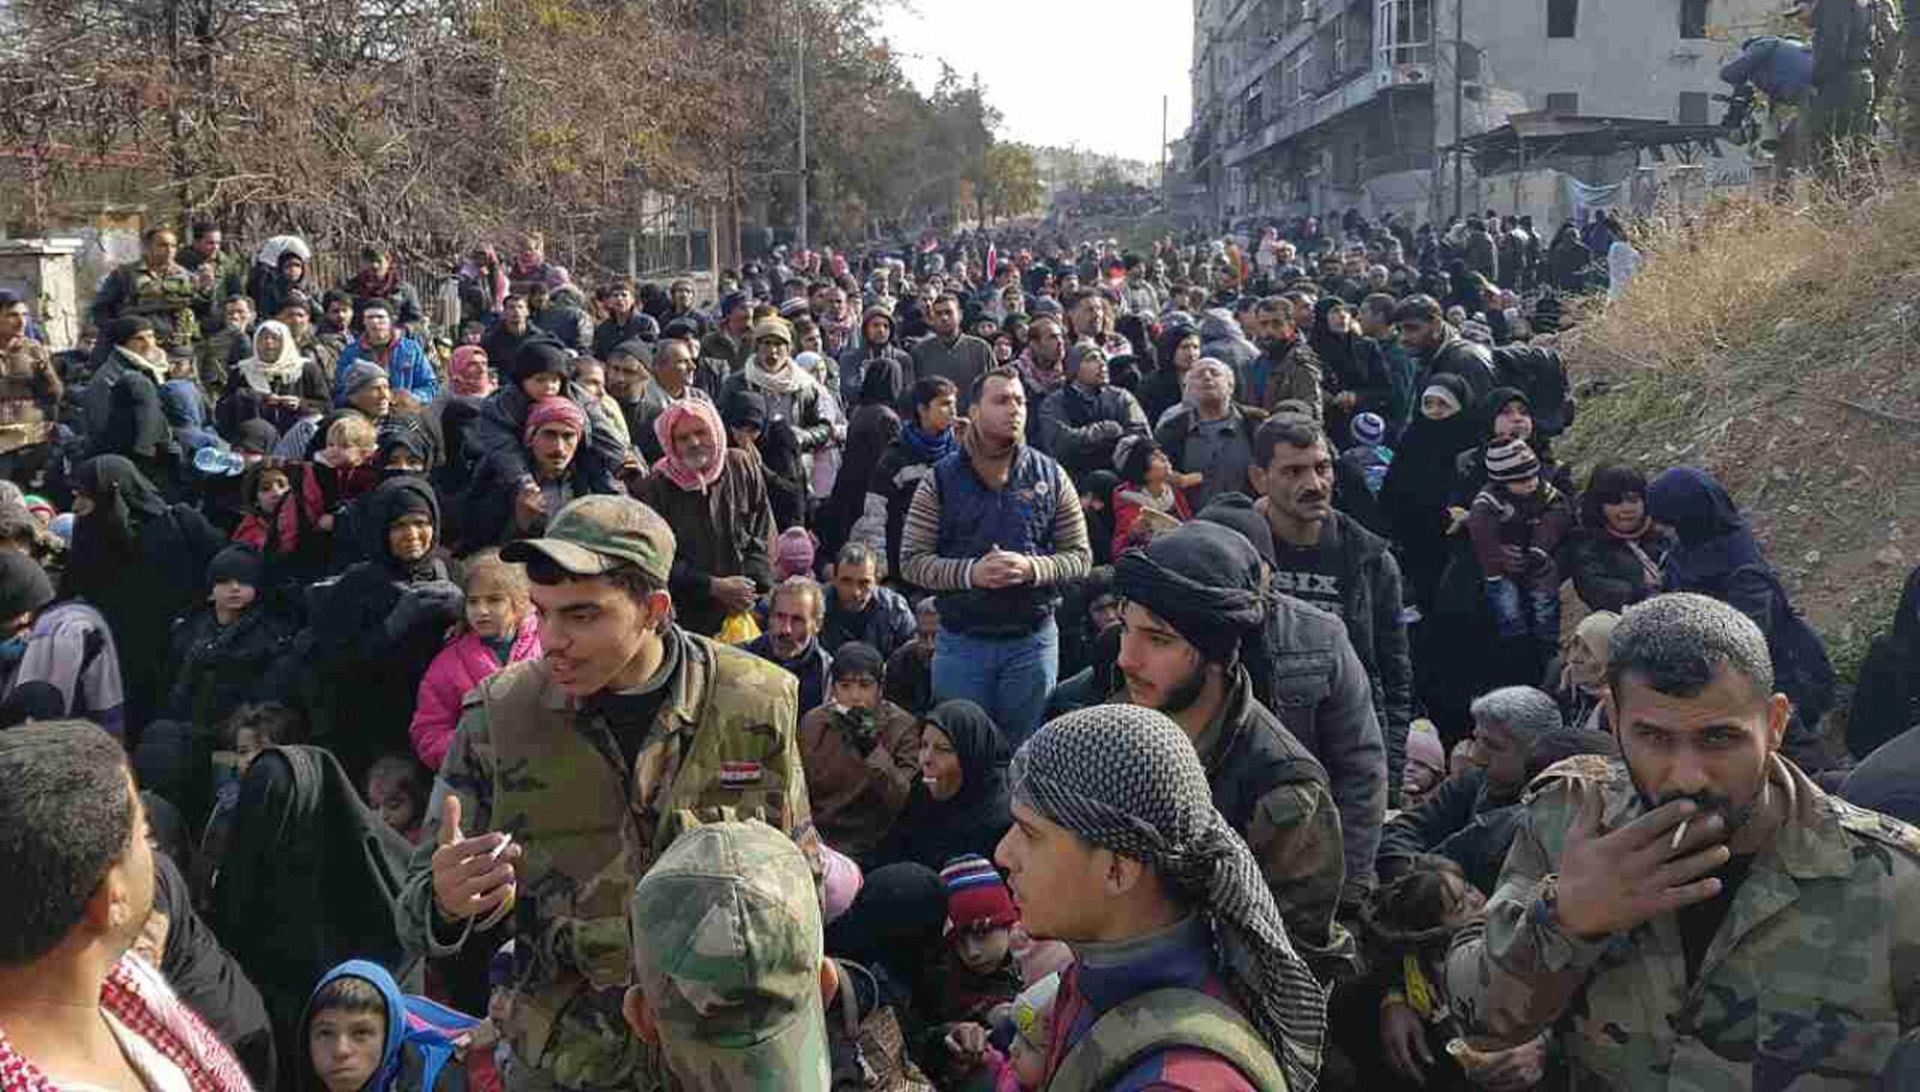 epa05666080 People gather to leave Al-Salhen neighborhood in the eastern part of the northern city of Aleppo, Syria, 08 December 2016. More people are fleeing Aleppo eastern districts as the Syrian government forces move to recapture more districts, where they are involved in a large-scale offensive to expel the insurgents. Syrian rebel factions have also fully retreated from the historic center of Aleppo.  EPA/STRINGER BEST QUALITY AVAILABLE